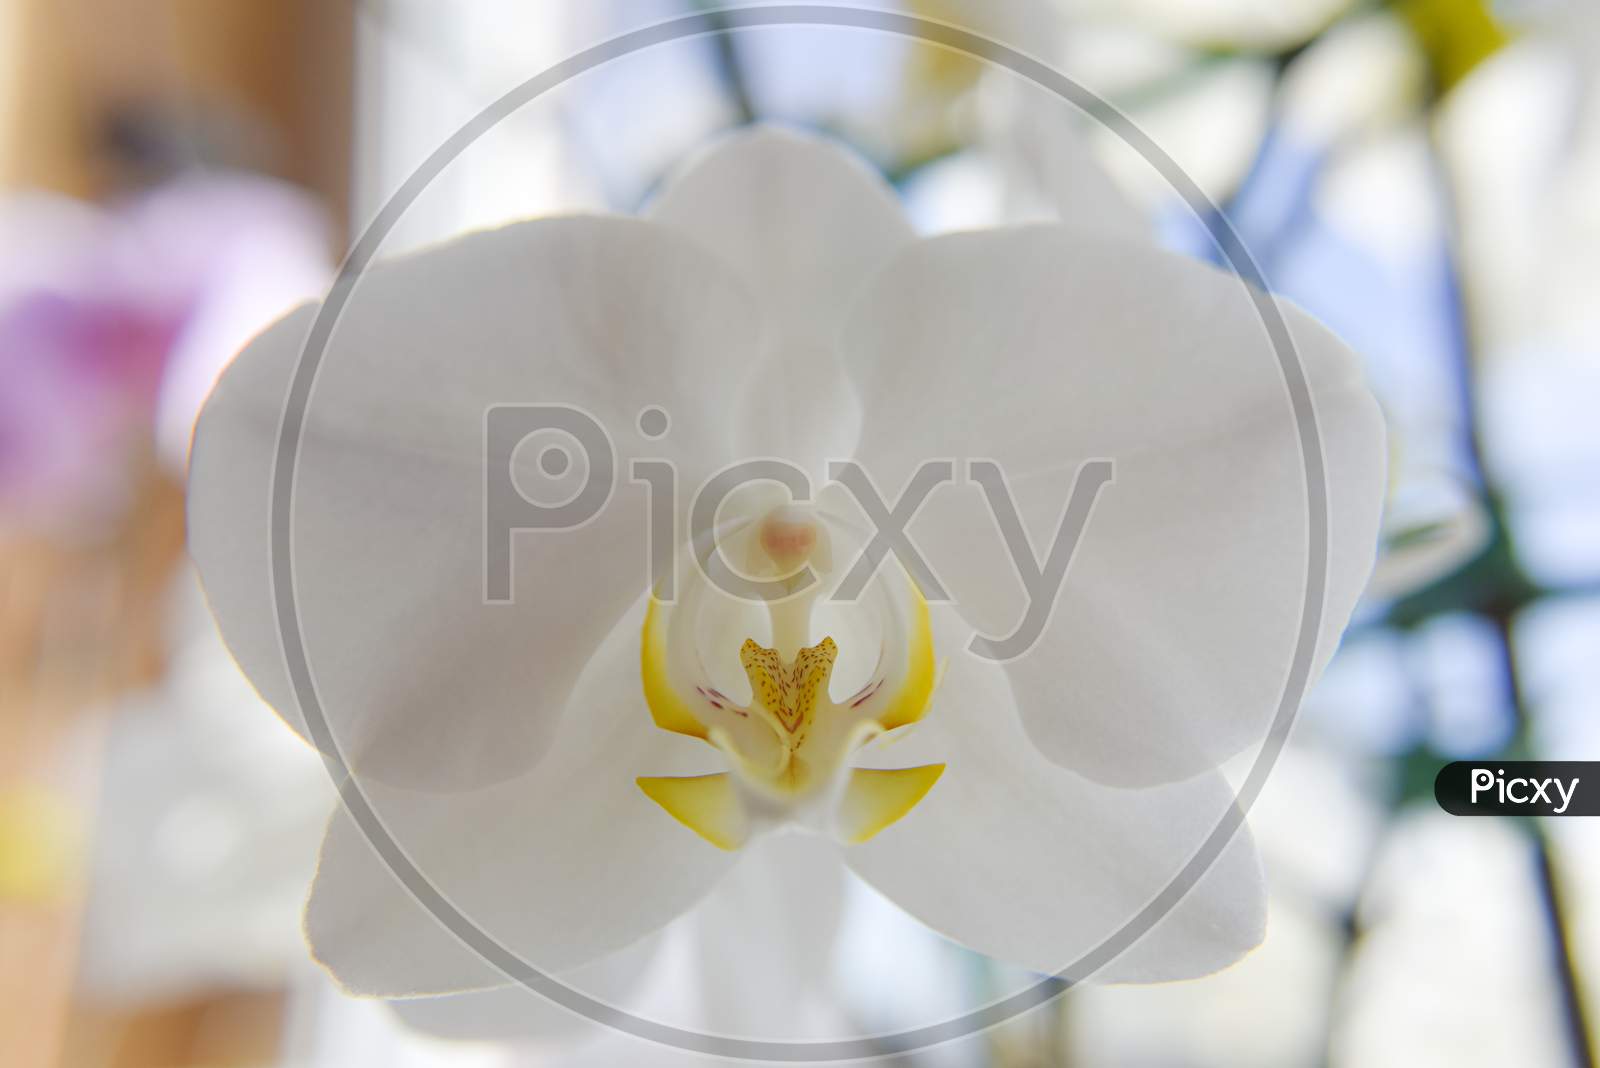 Closer Look At The Head Of The White Orchid. Macro With Selective Focus. The Light From The Back Side